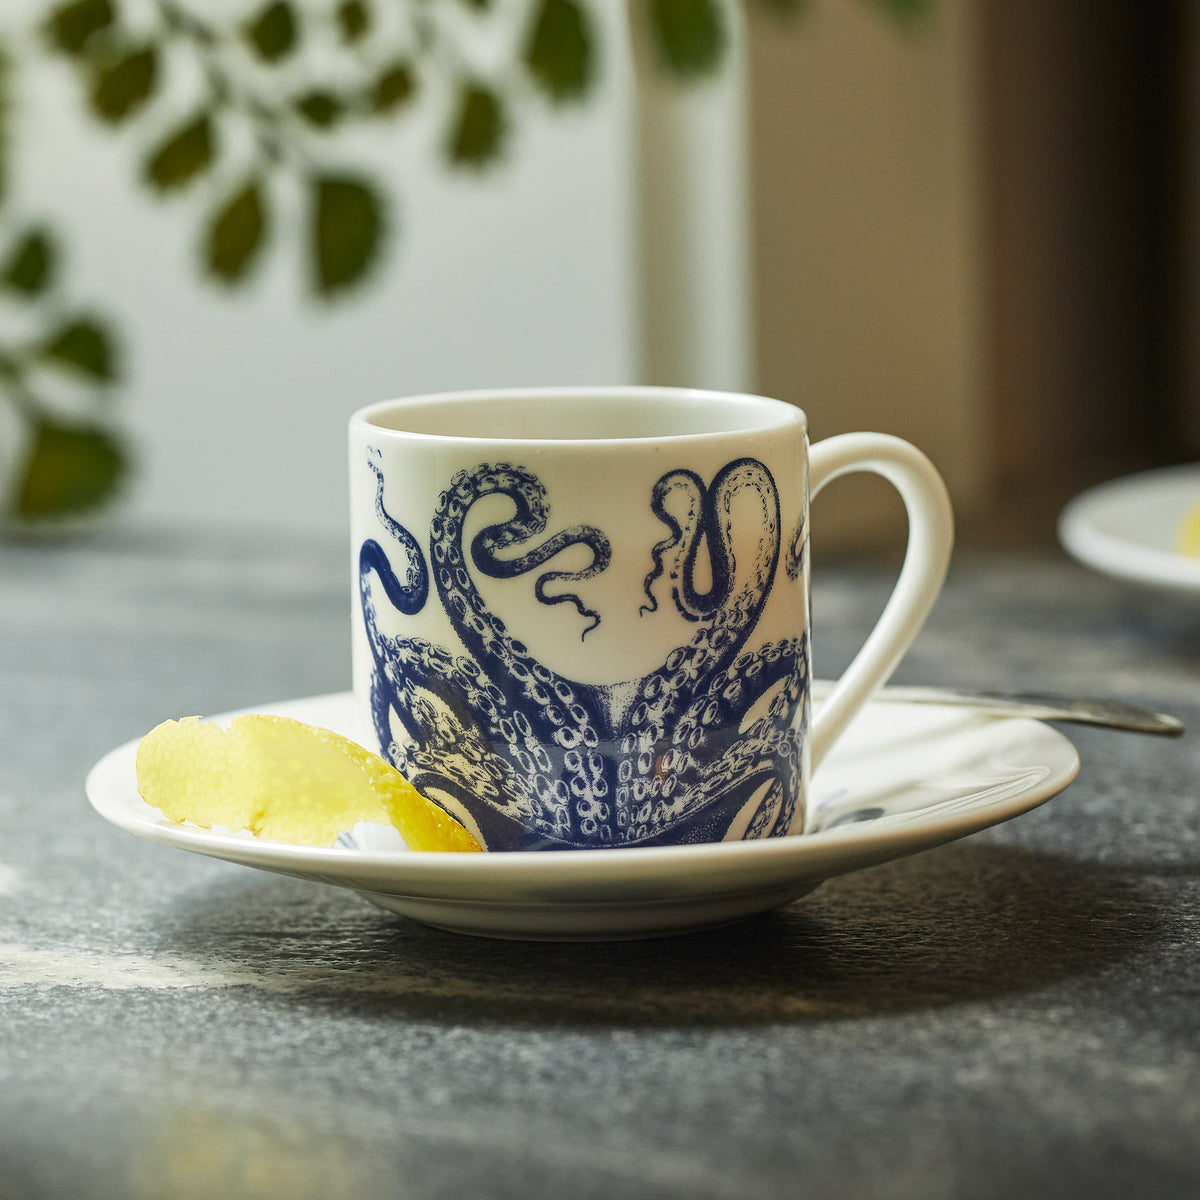 A Caskata Lucy Espresso Cups &amp; Saucers, Set of 2 with a blue octopus design sits on a saucer, holding a lemon slice, with green plant leaves in the background.